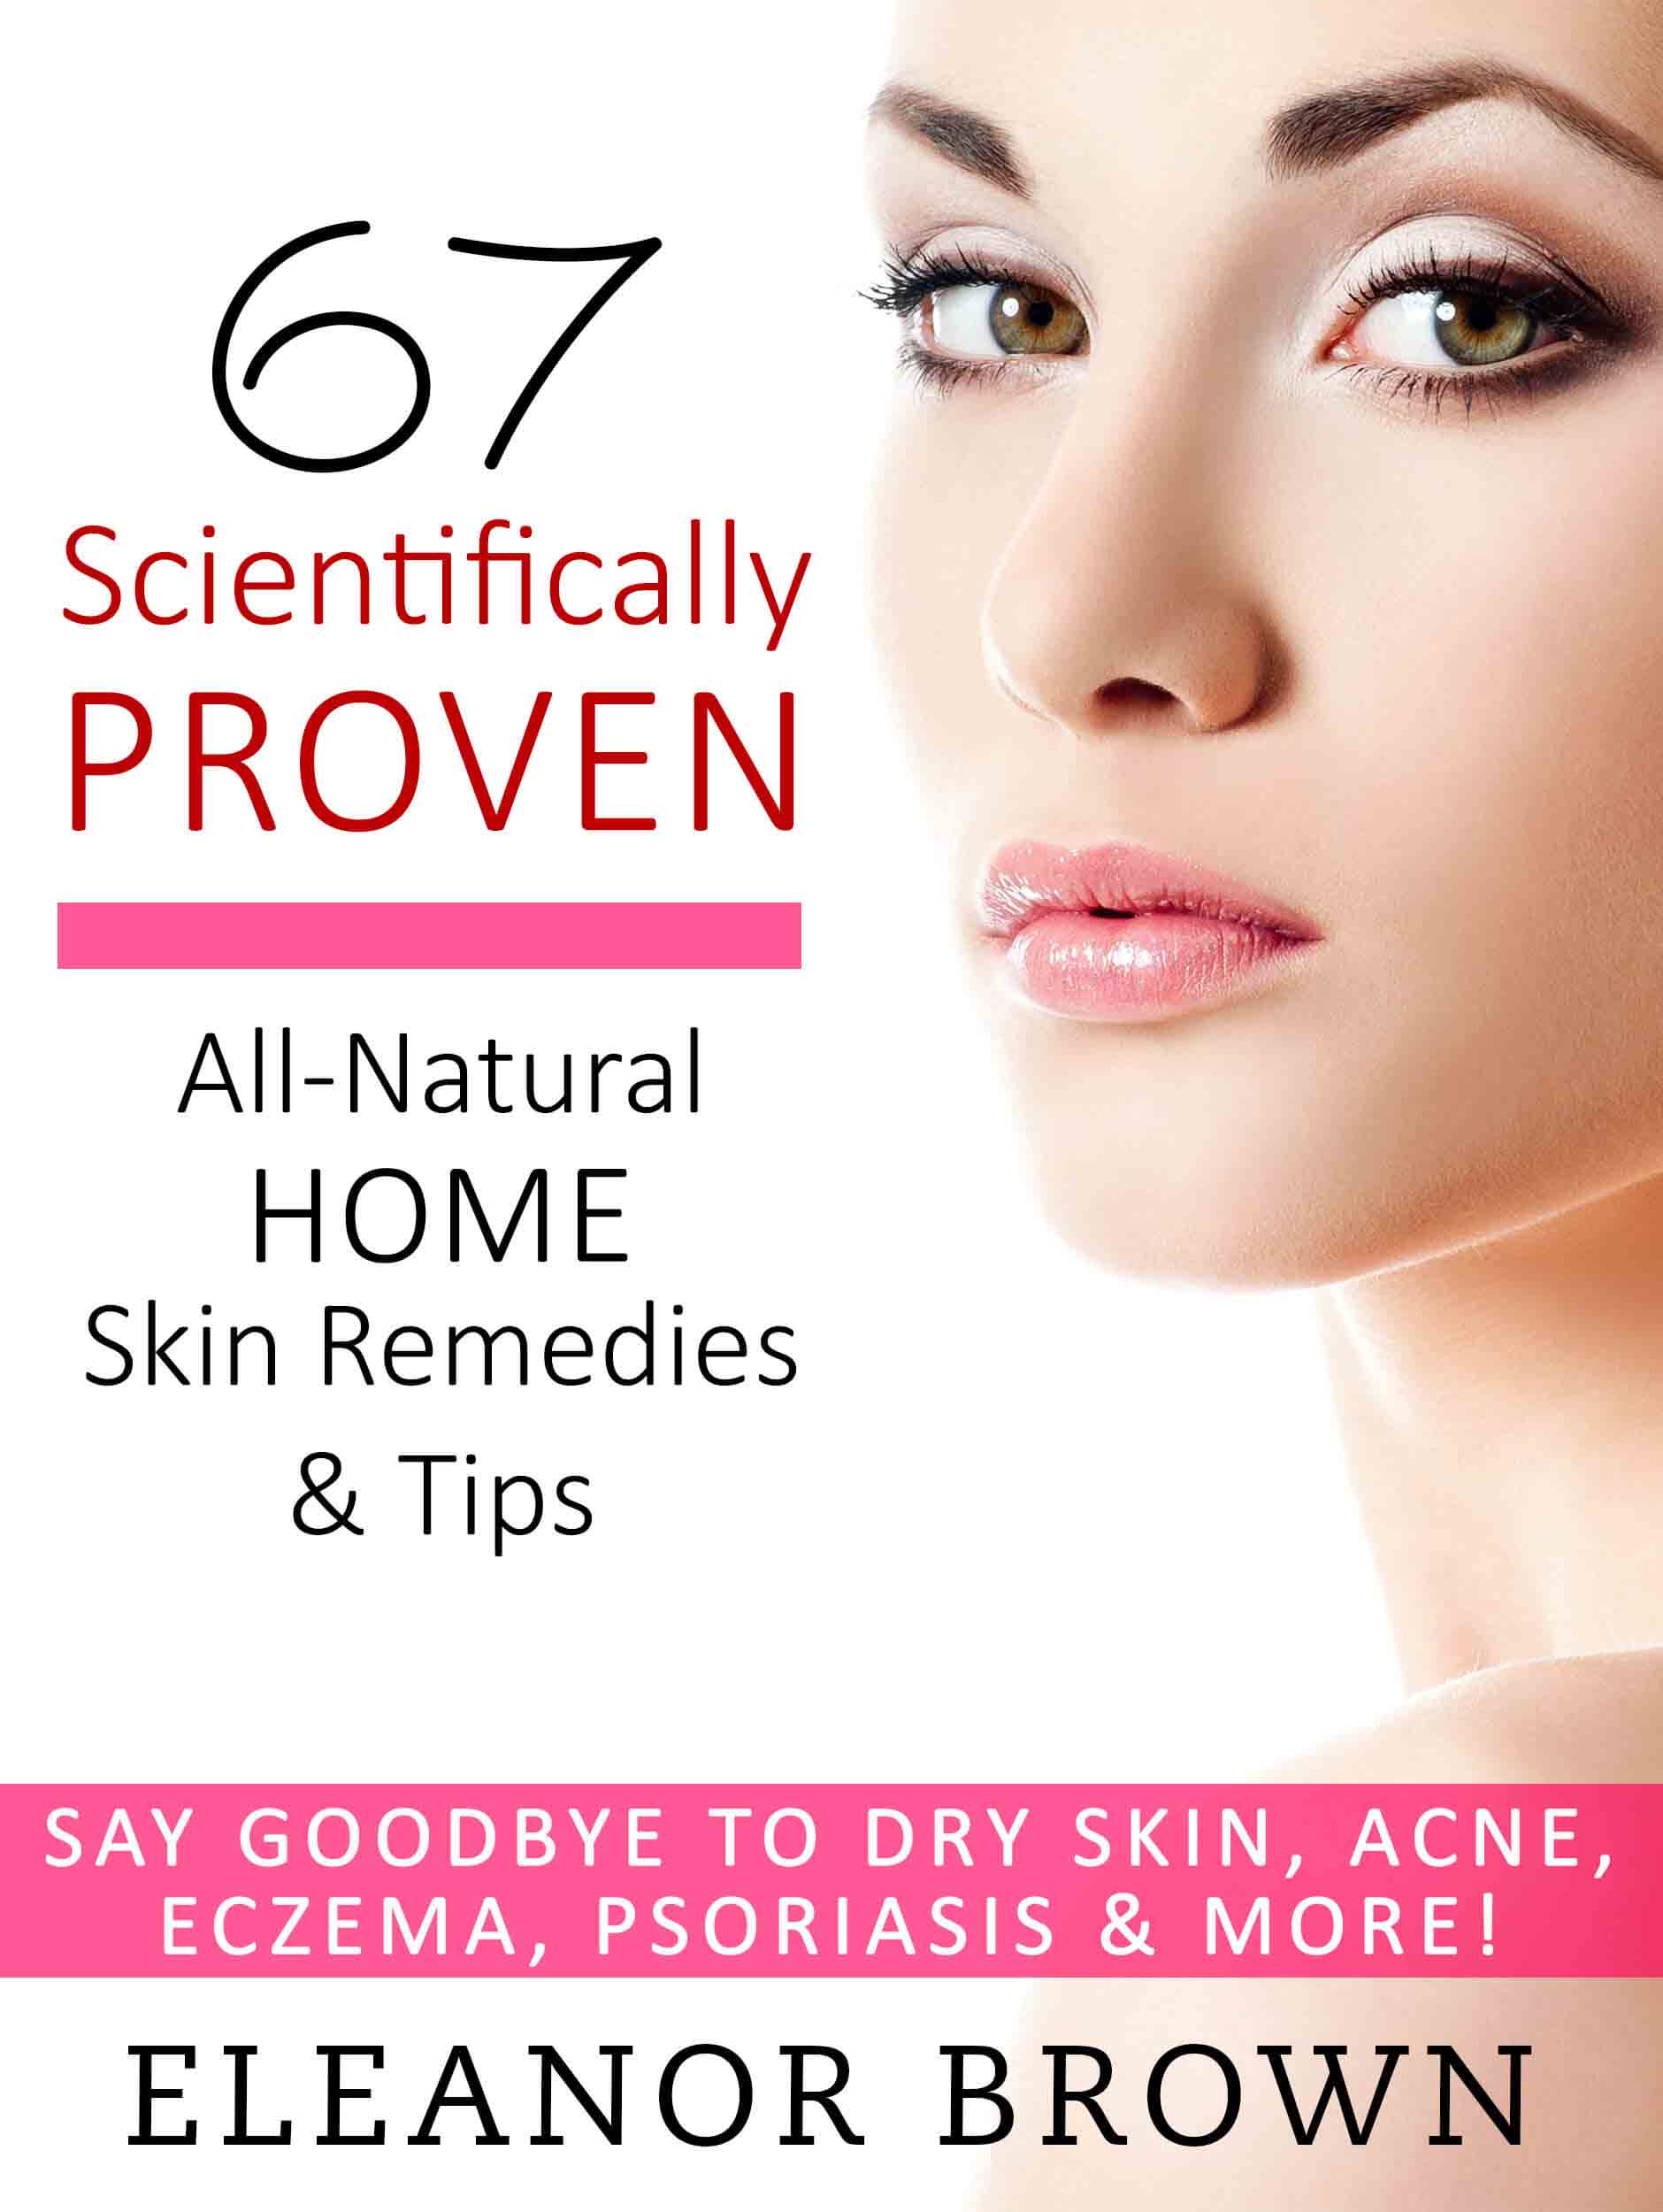 FREE: 67 Scientifically Proven All-Natural Home Skin Remedies & Tips: Say Goodbye To Dry Skin, Acne, Eczema, Psoriasis, & More! by Eleanor Brown